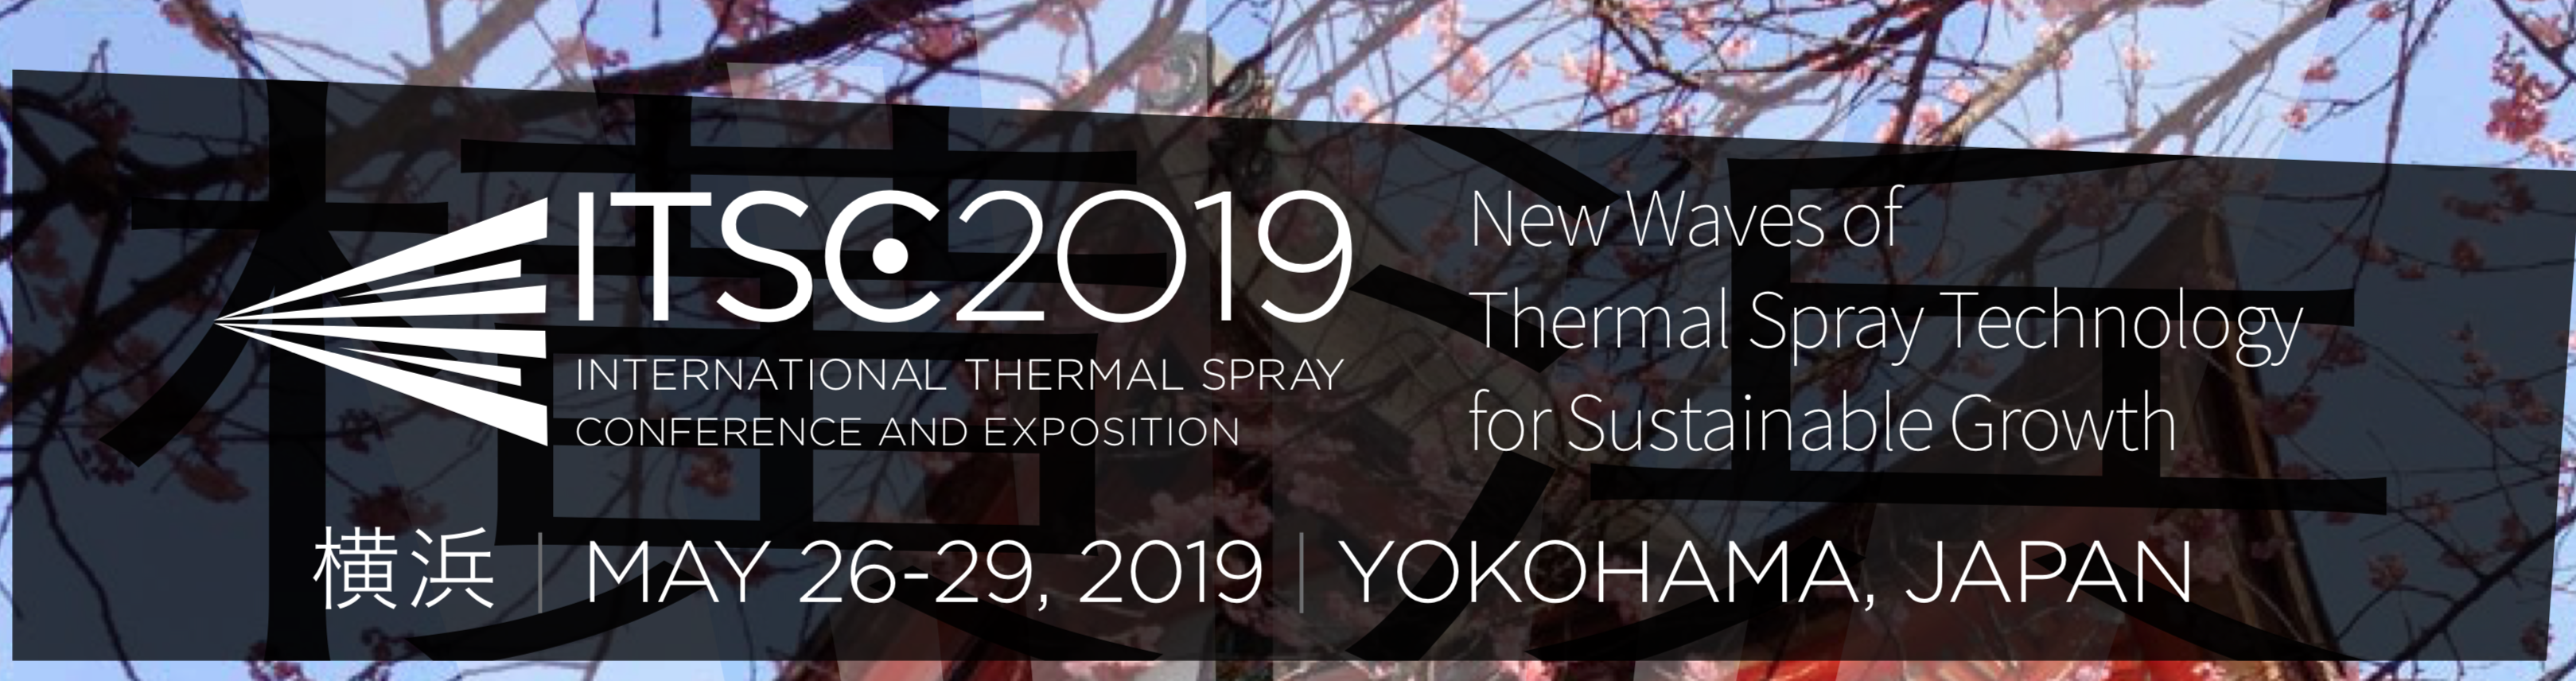 You are currently viewing IKH at ITSC 2019 International Conference in Yokohama, Japan